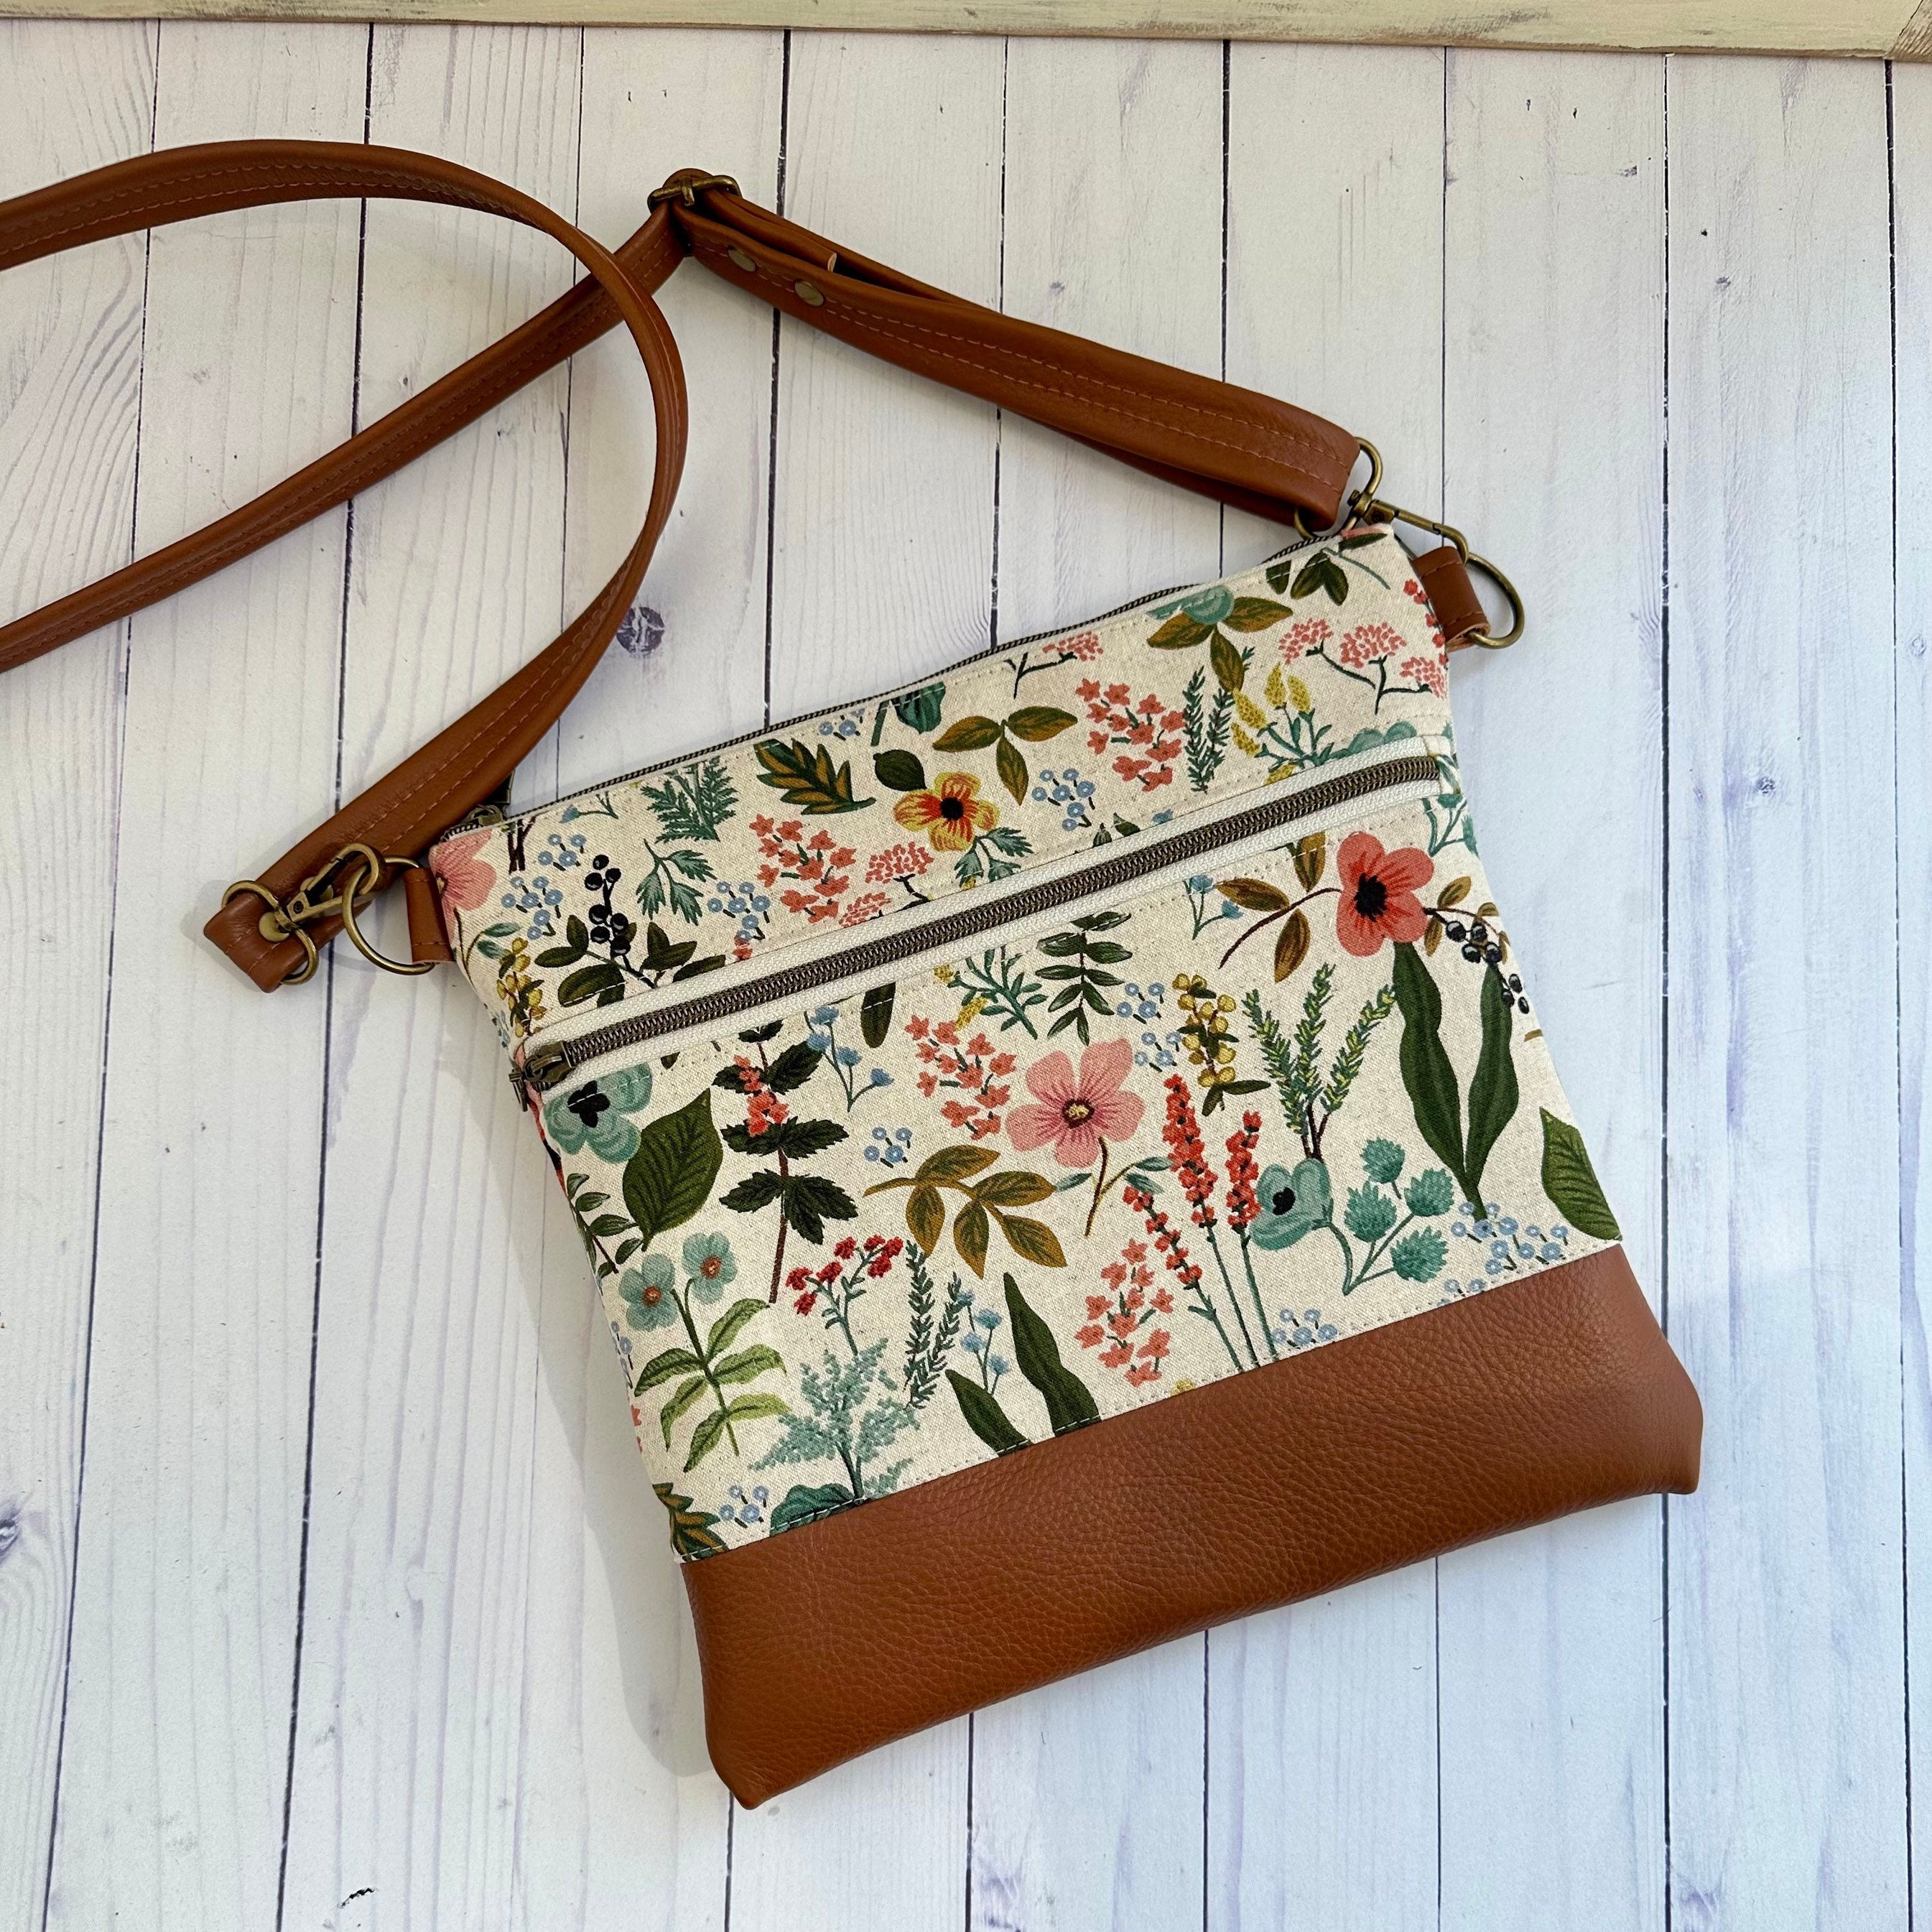 Shoppers Say This Convertible Crossbody Is a Great Travel Bag